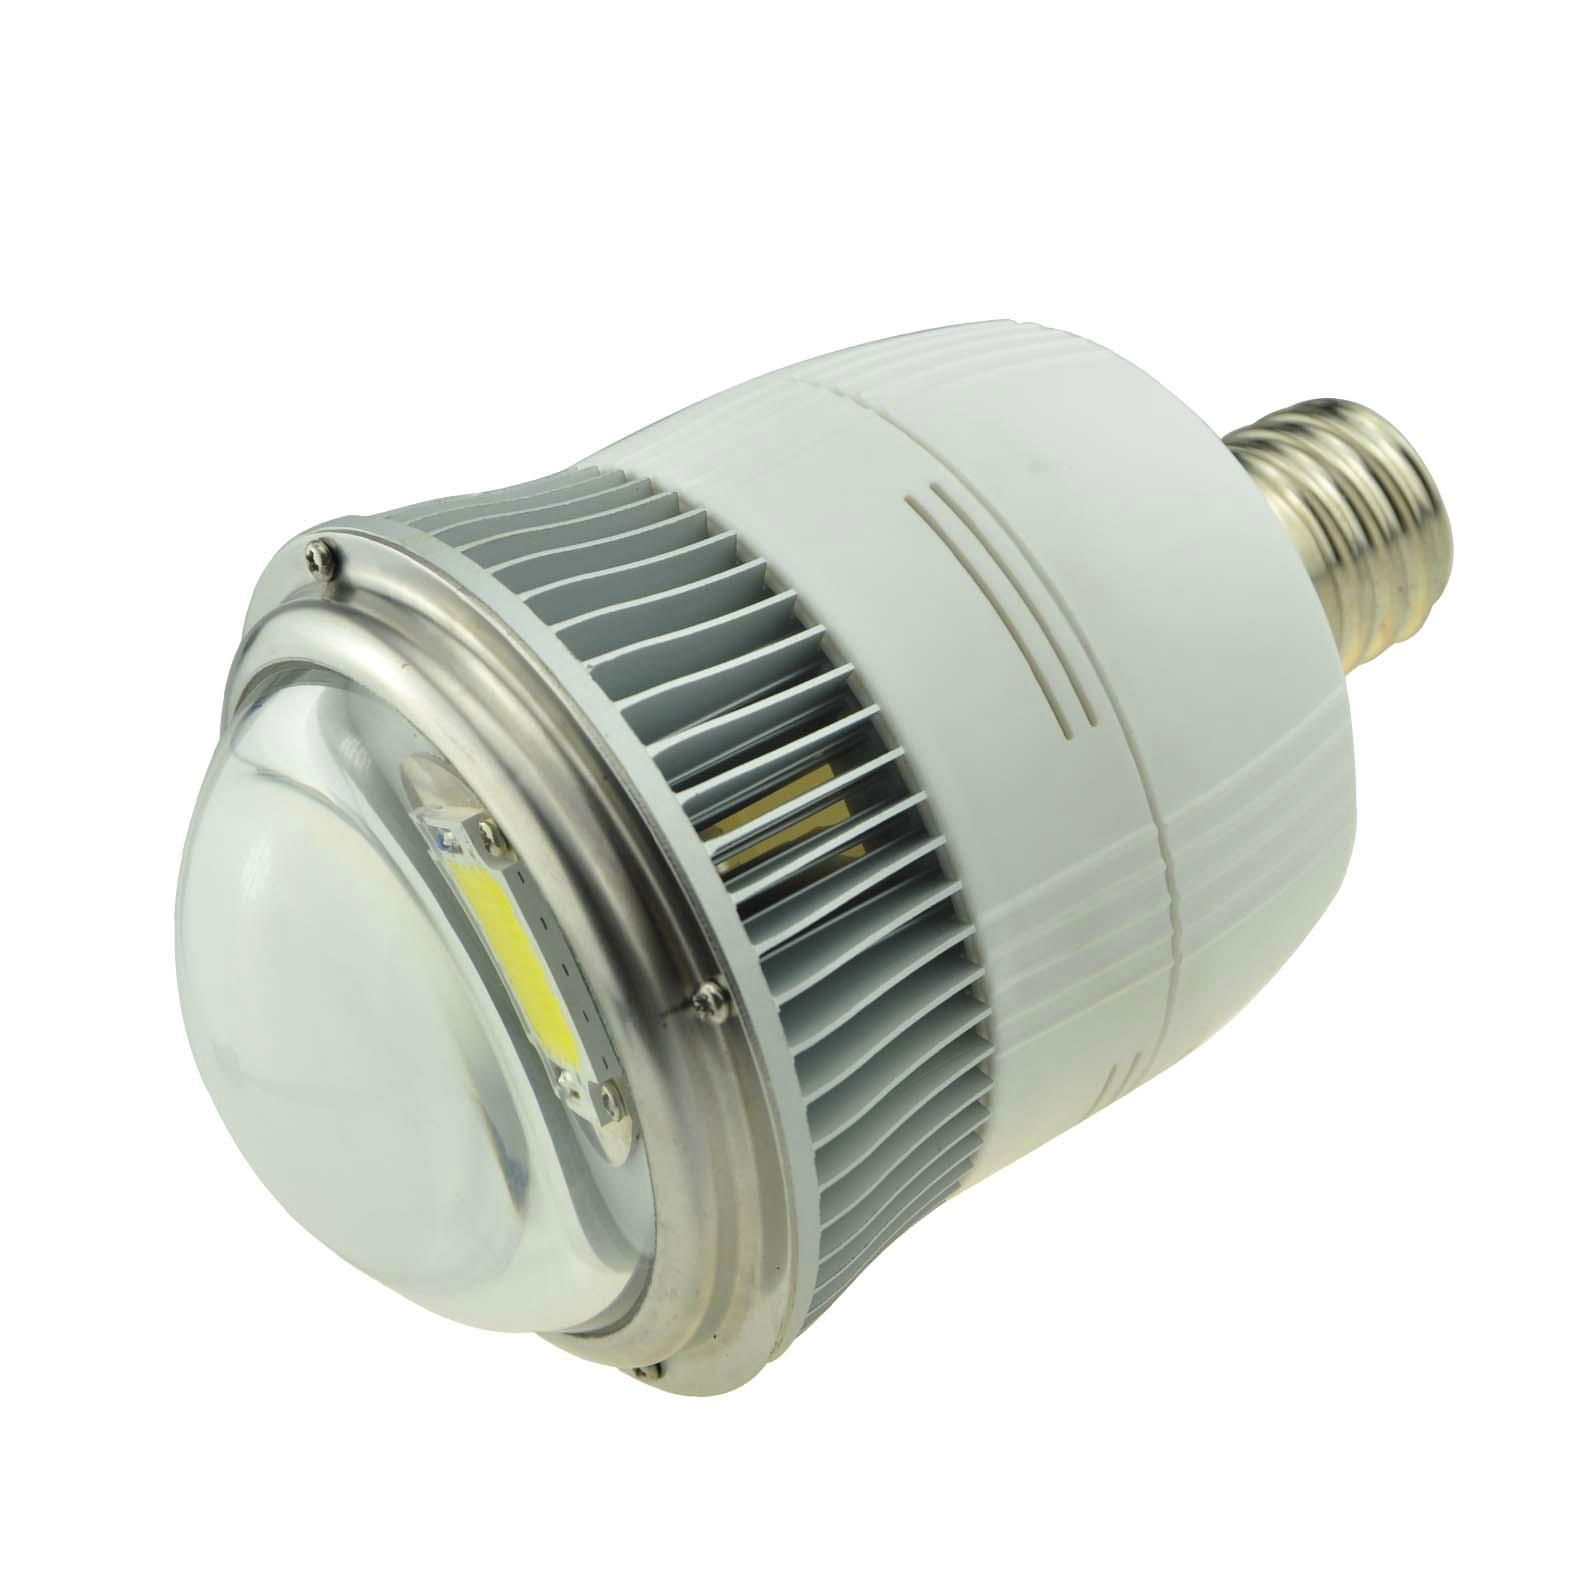 40 w LED E40 mining light can replace 125 w energy-saving lamps